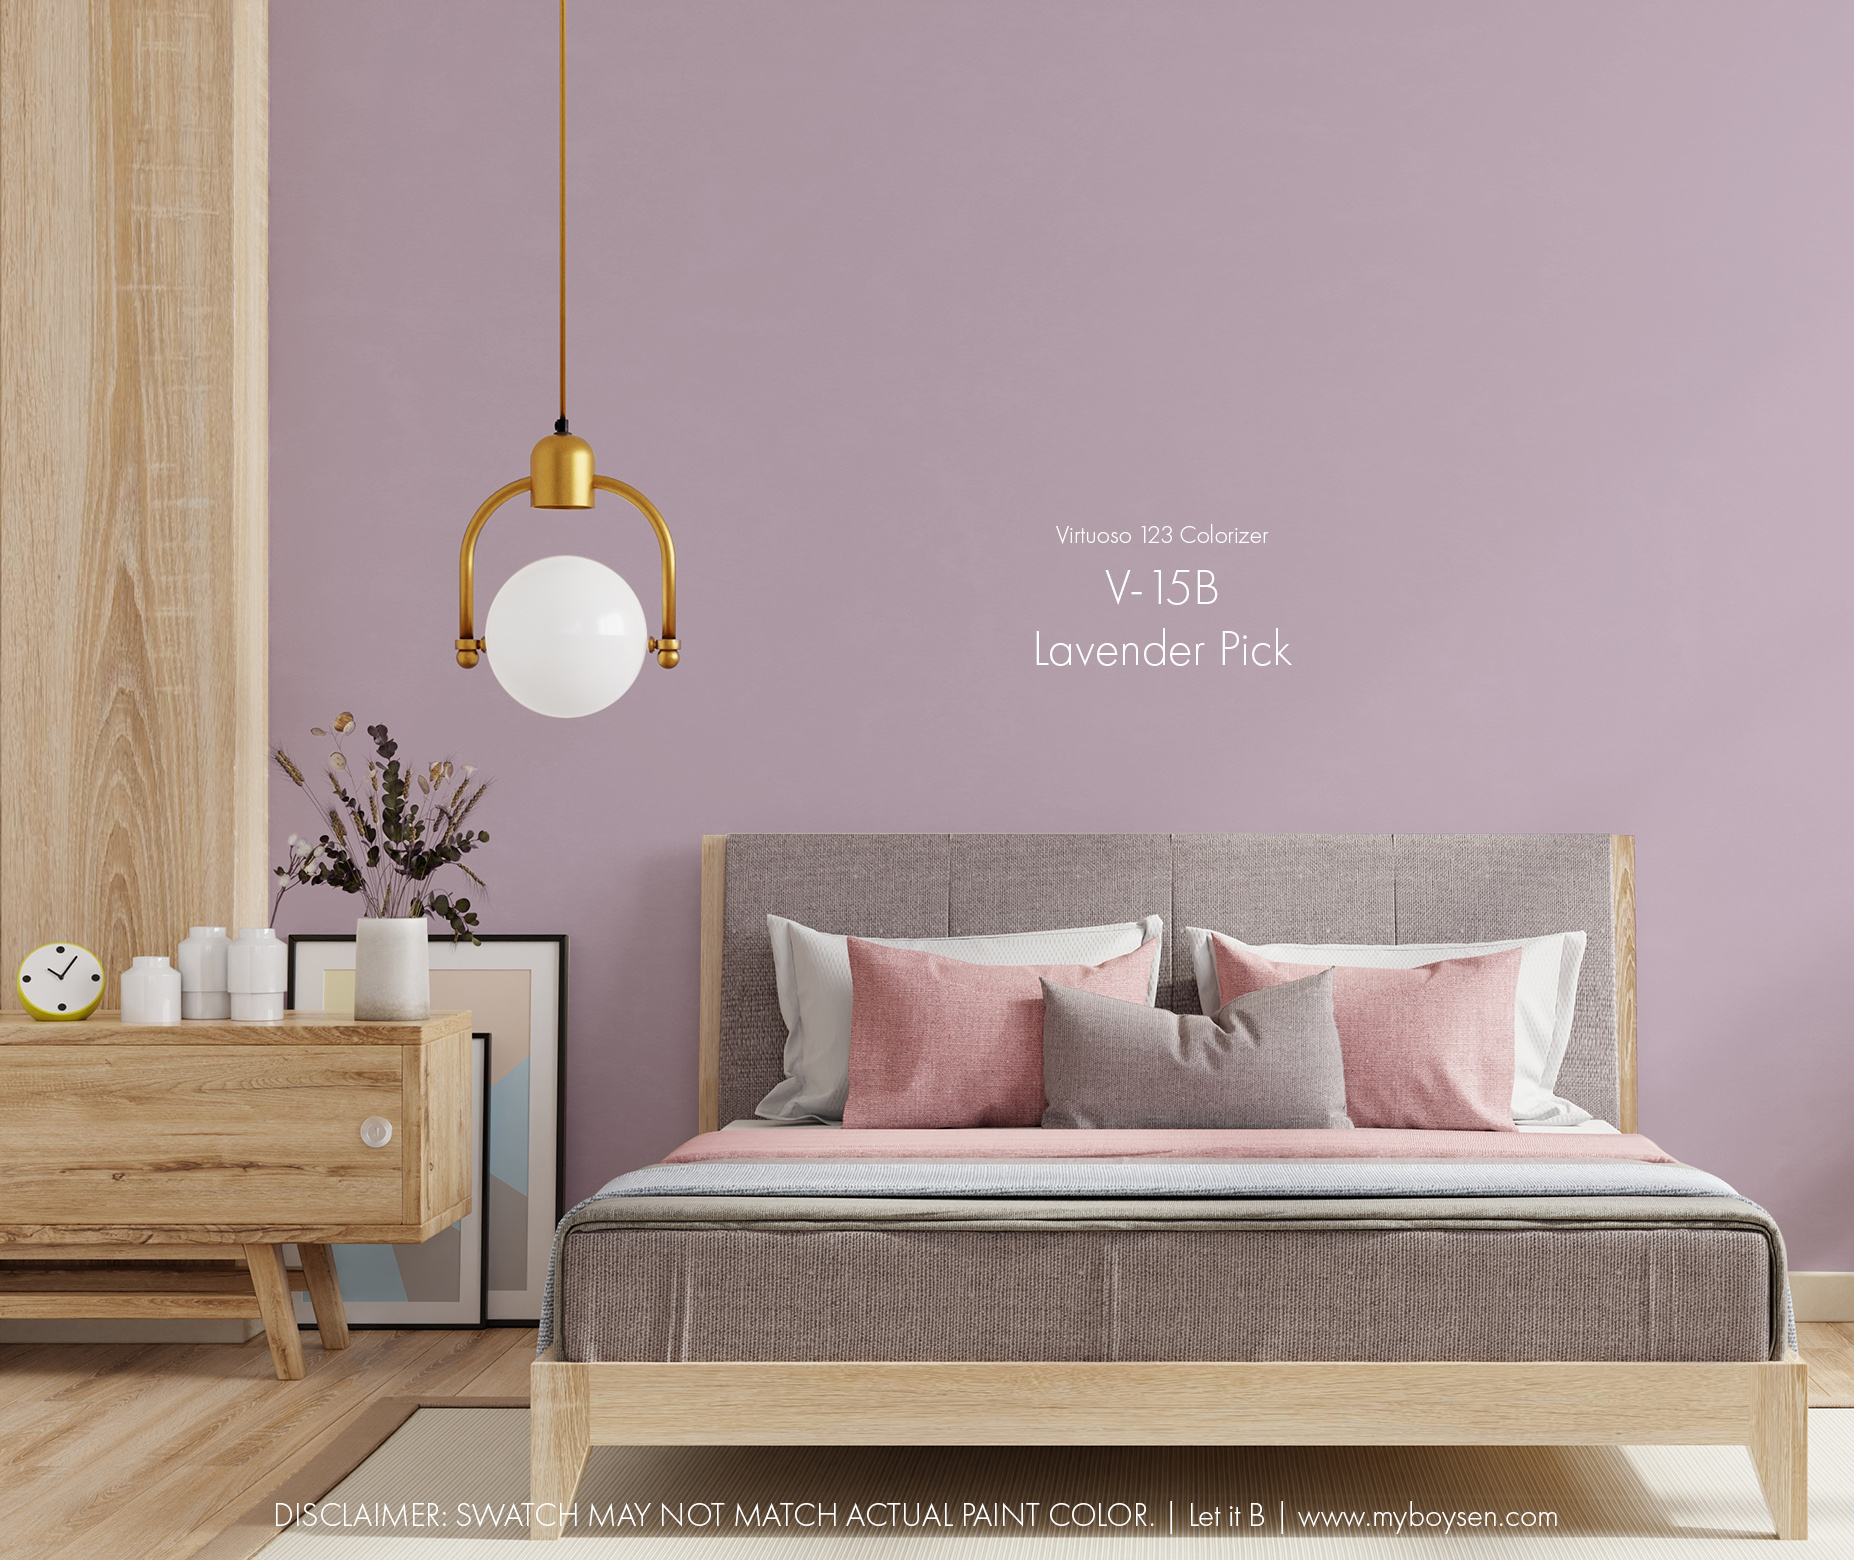 Pastel Perfection: Delicate Hues for a Dreamy Aesthetic | MyBoysen